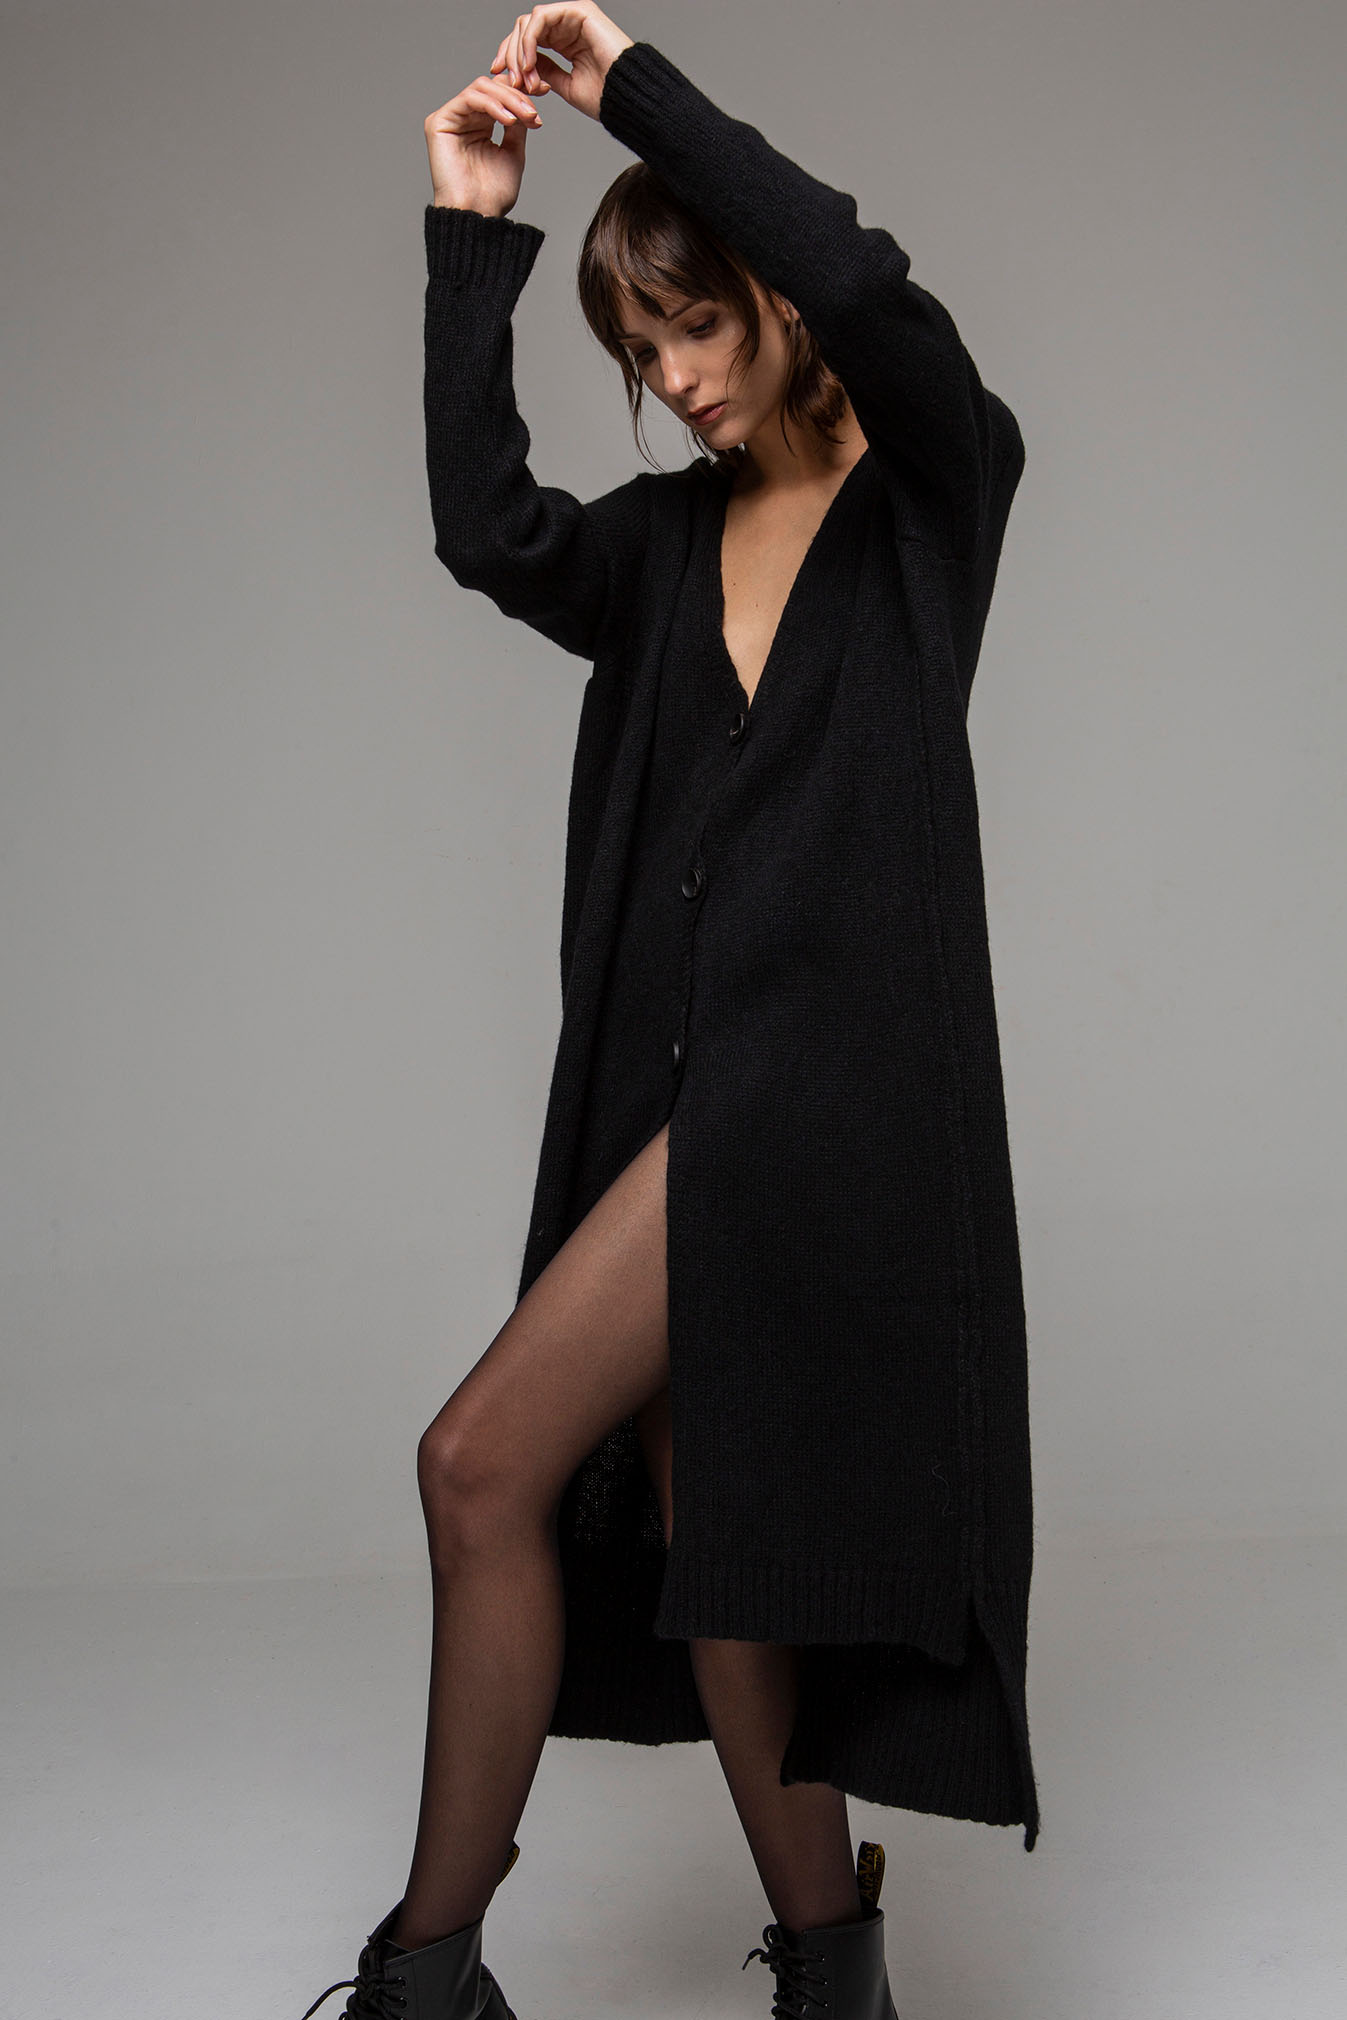 Women's Long Cardigan by Noble Athens